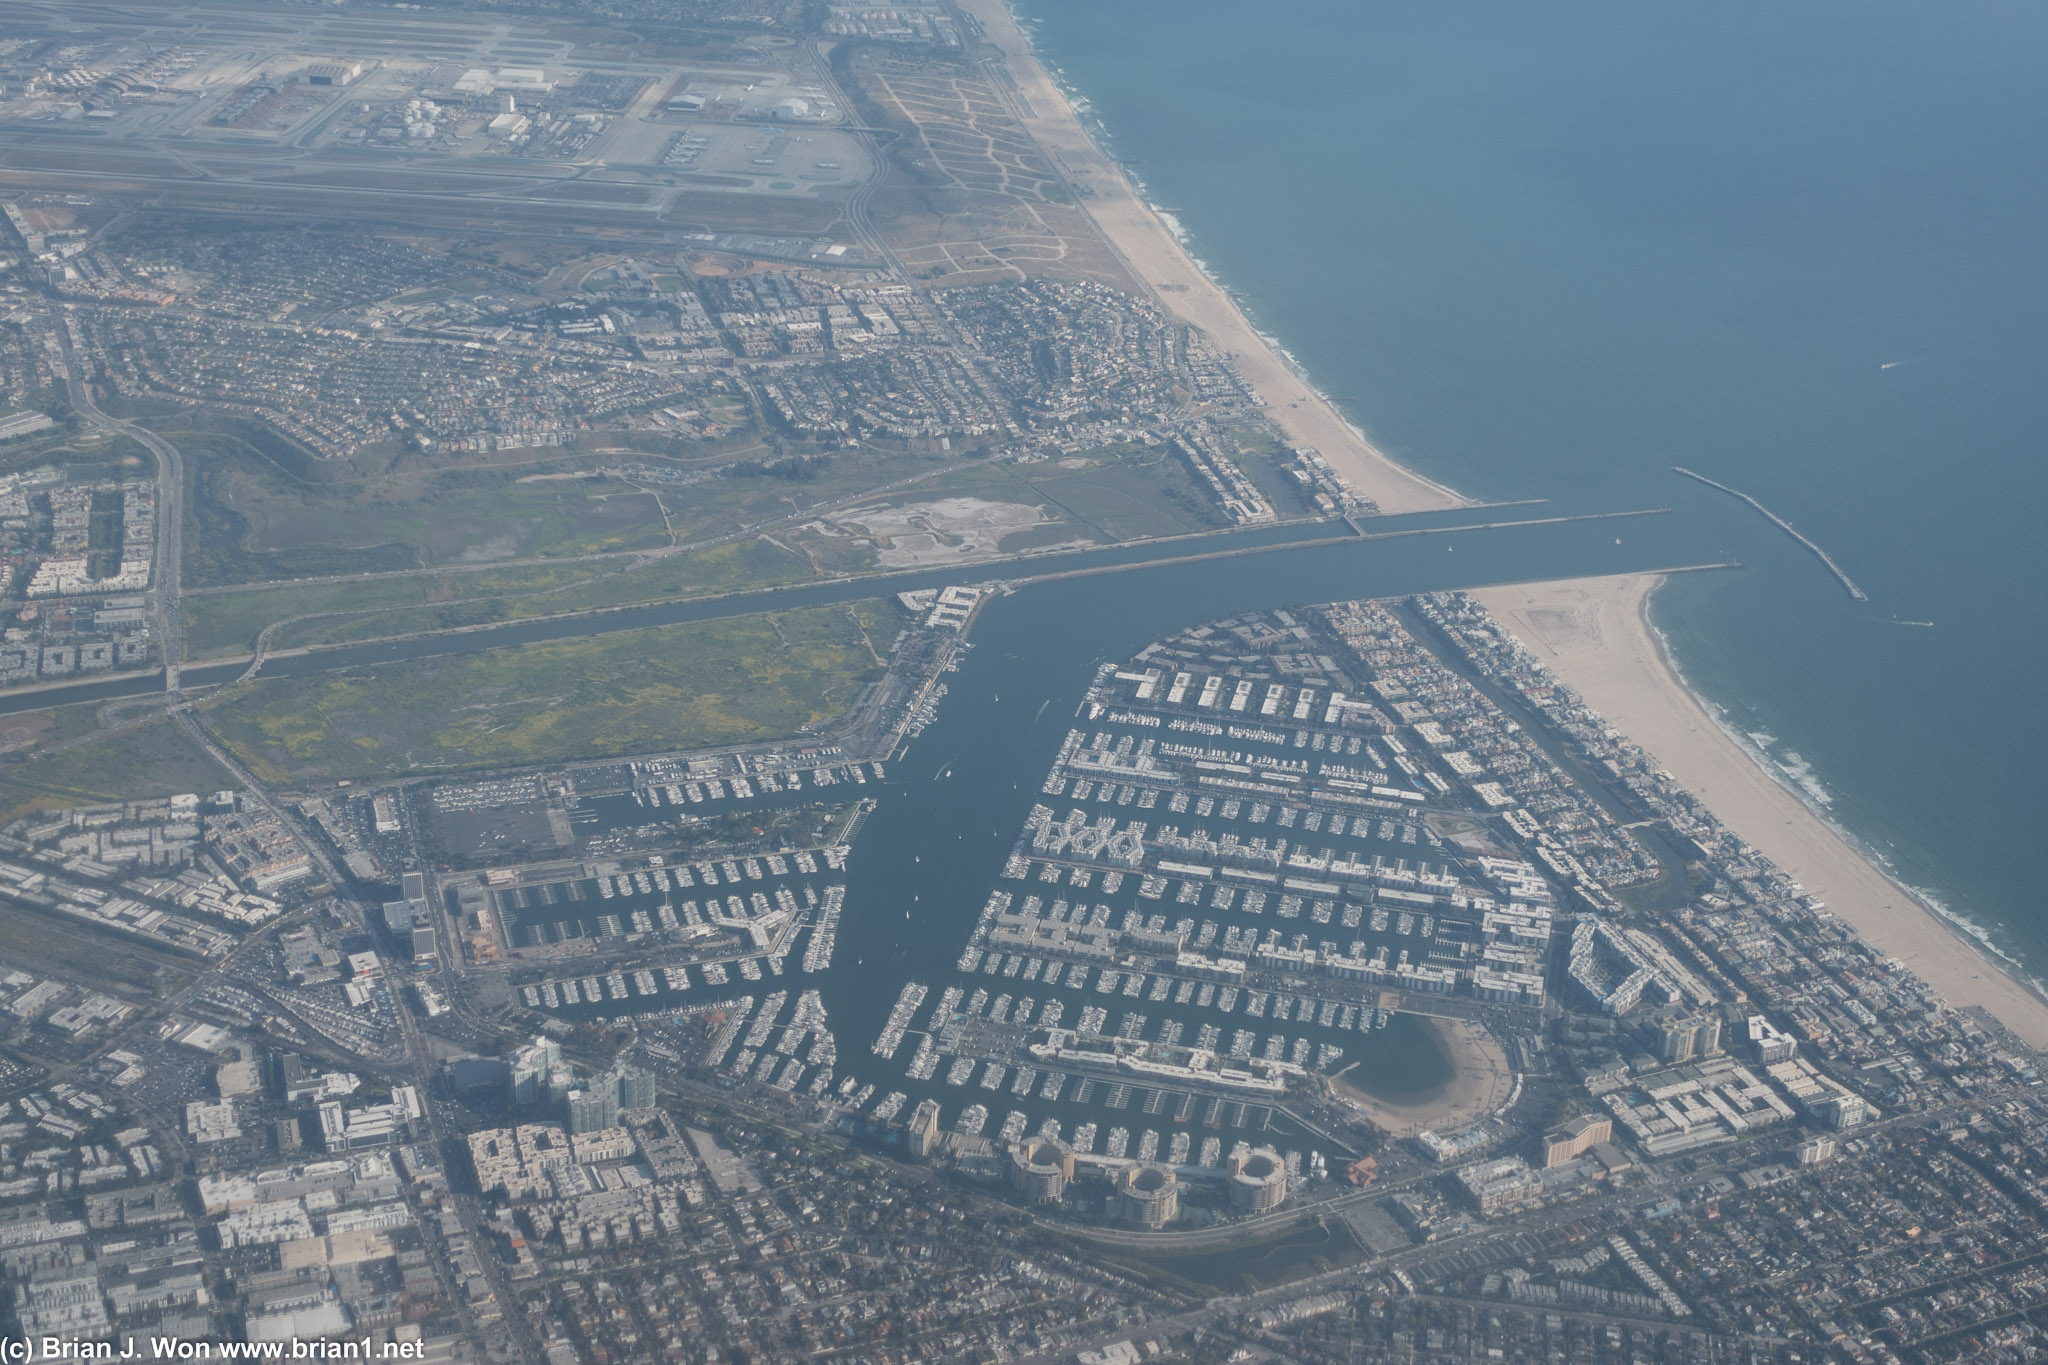 Unusually clear day over Marina del Rey.